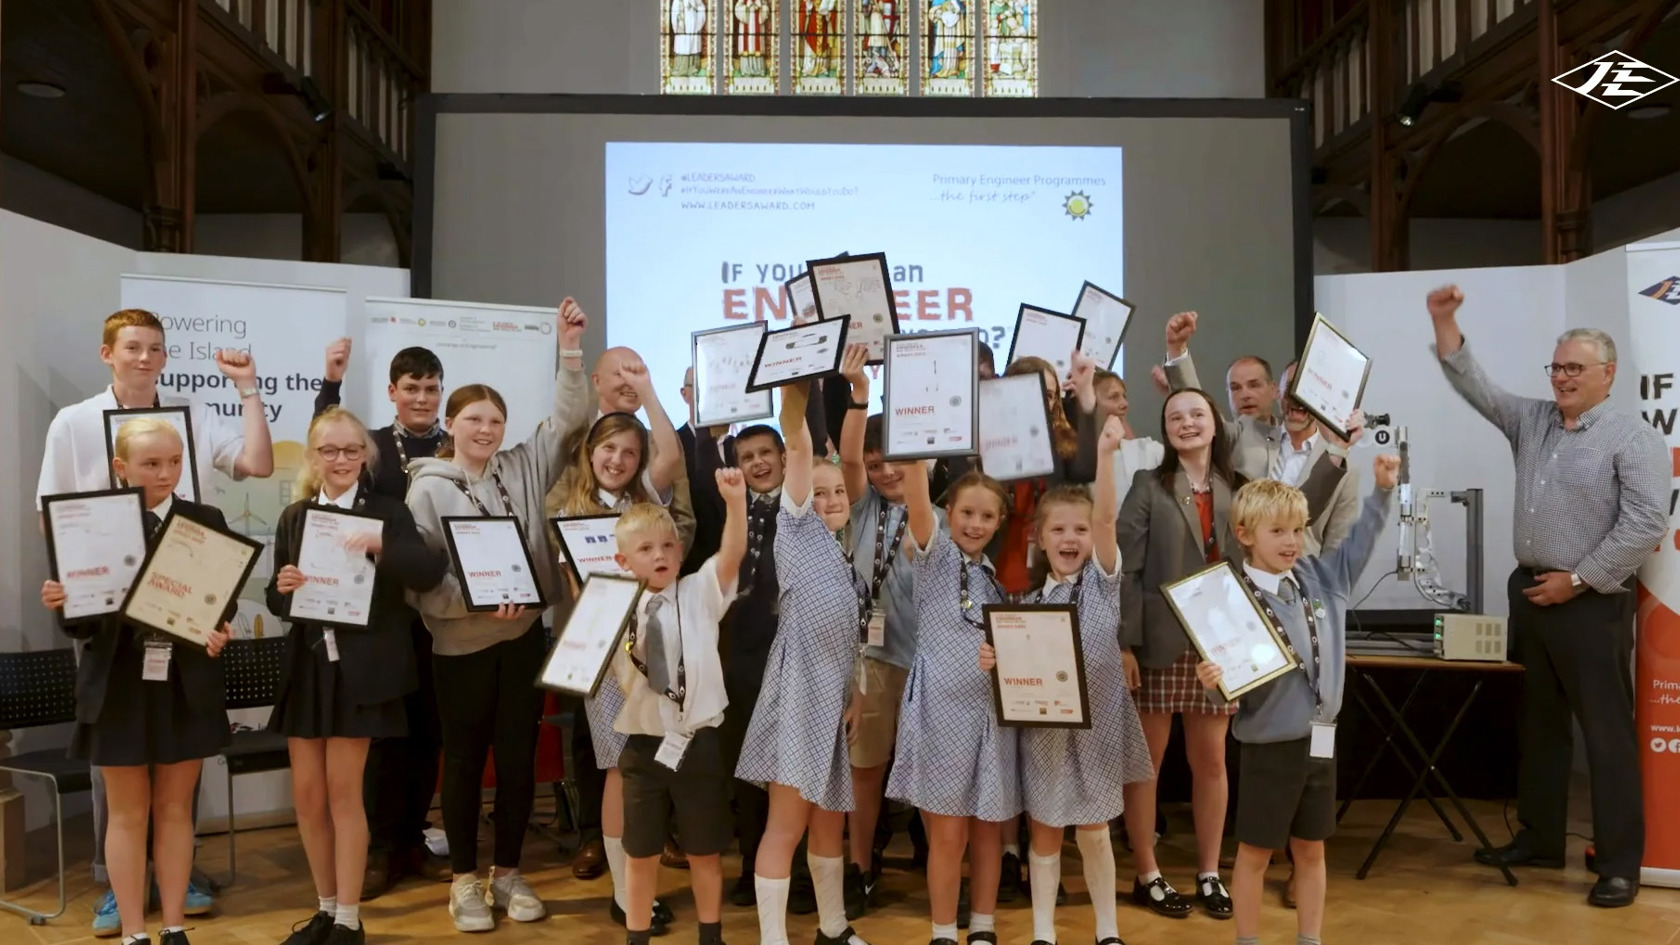 Primary Engineer Awards 2022 winners on stage celebrating their wins